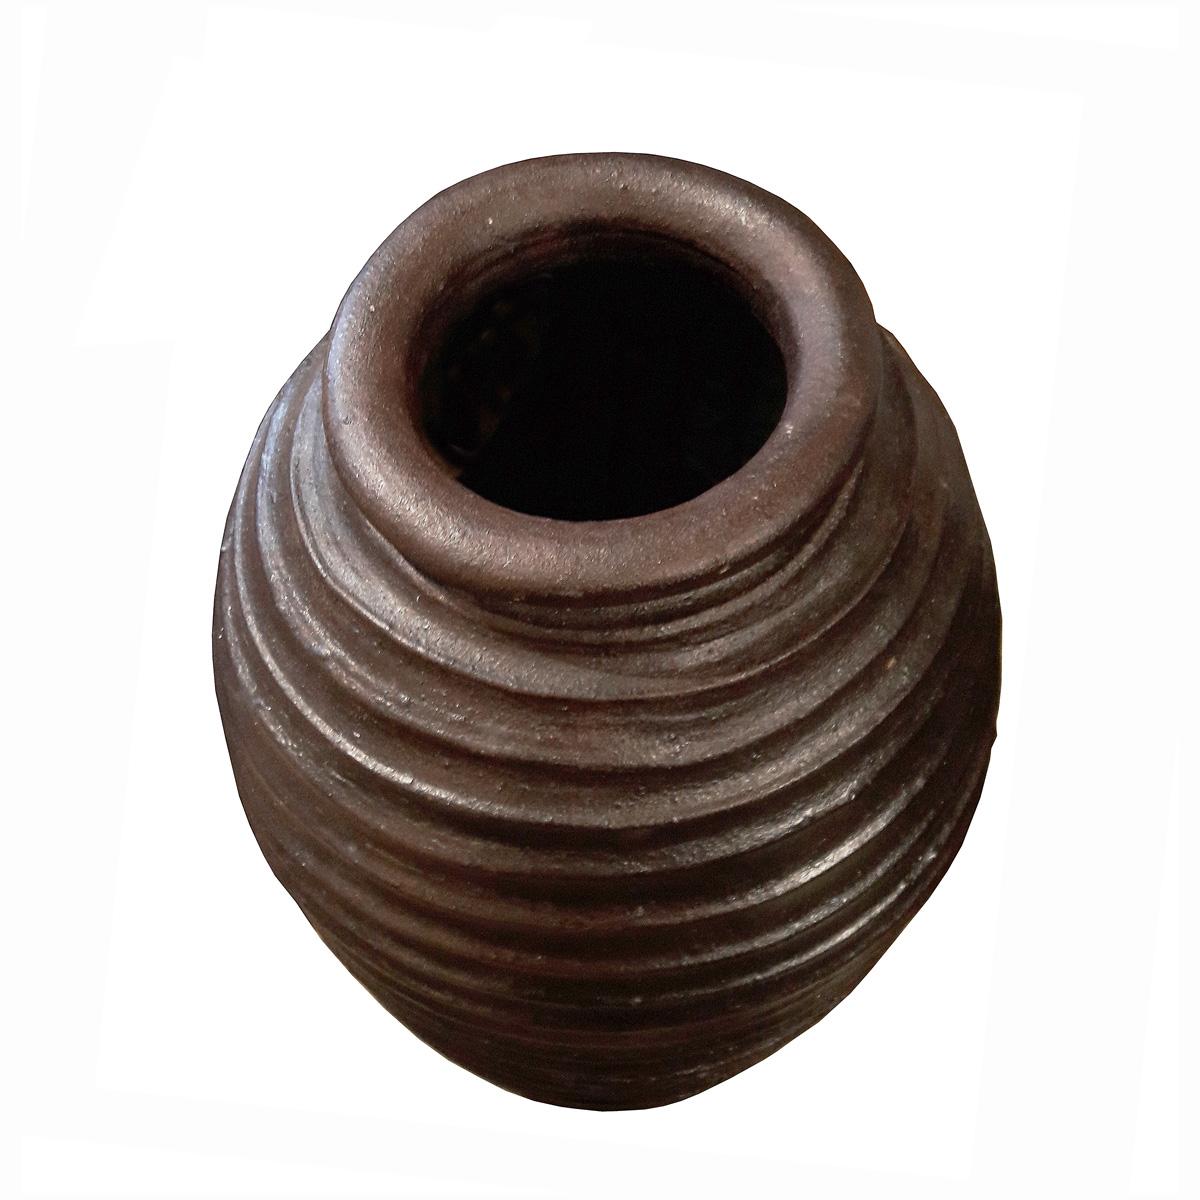 A tall clay jar or amphora, handcrafted in Indonesia, contemporary. Solid earthenware with rough ribbed finish, coated in brown glaze. Can be used as a decorative element or as a planter or cachepot, indoors or outdoors. 
